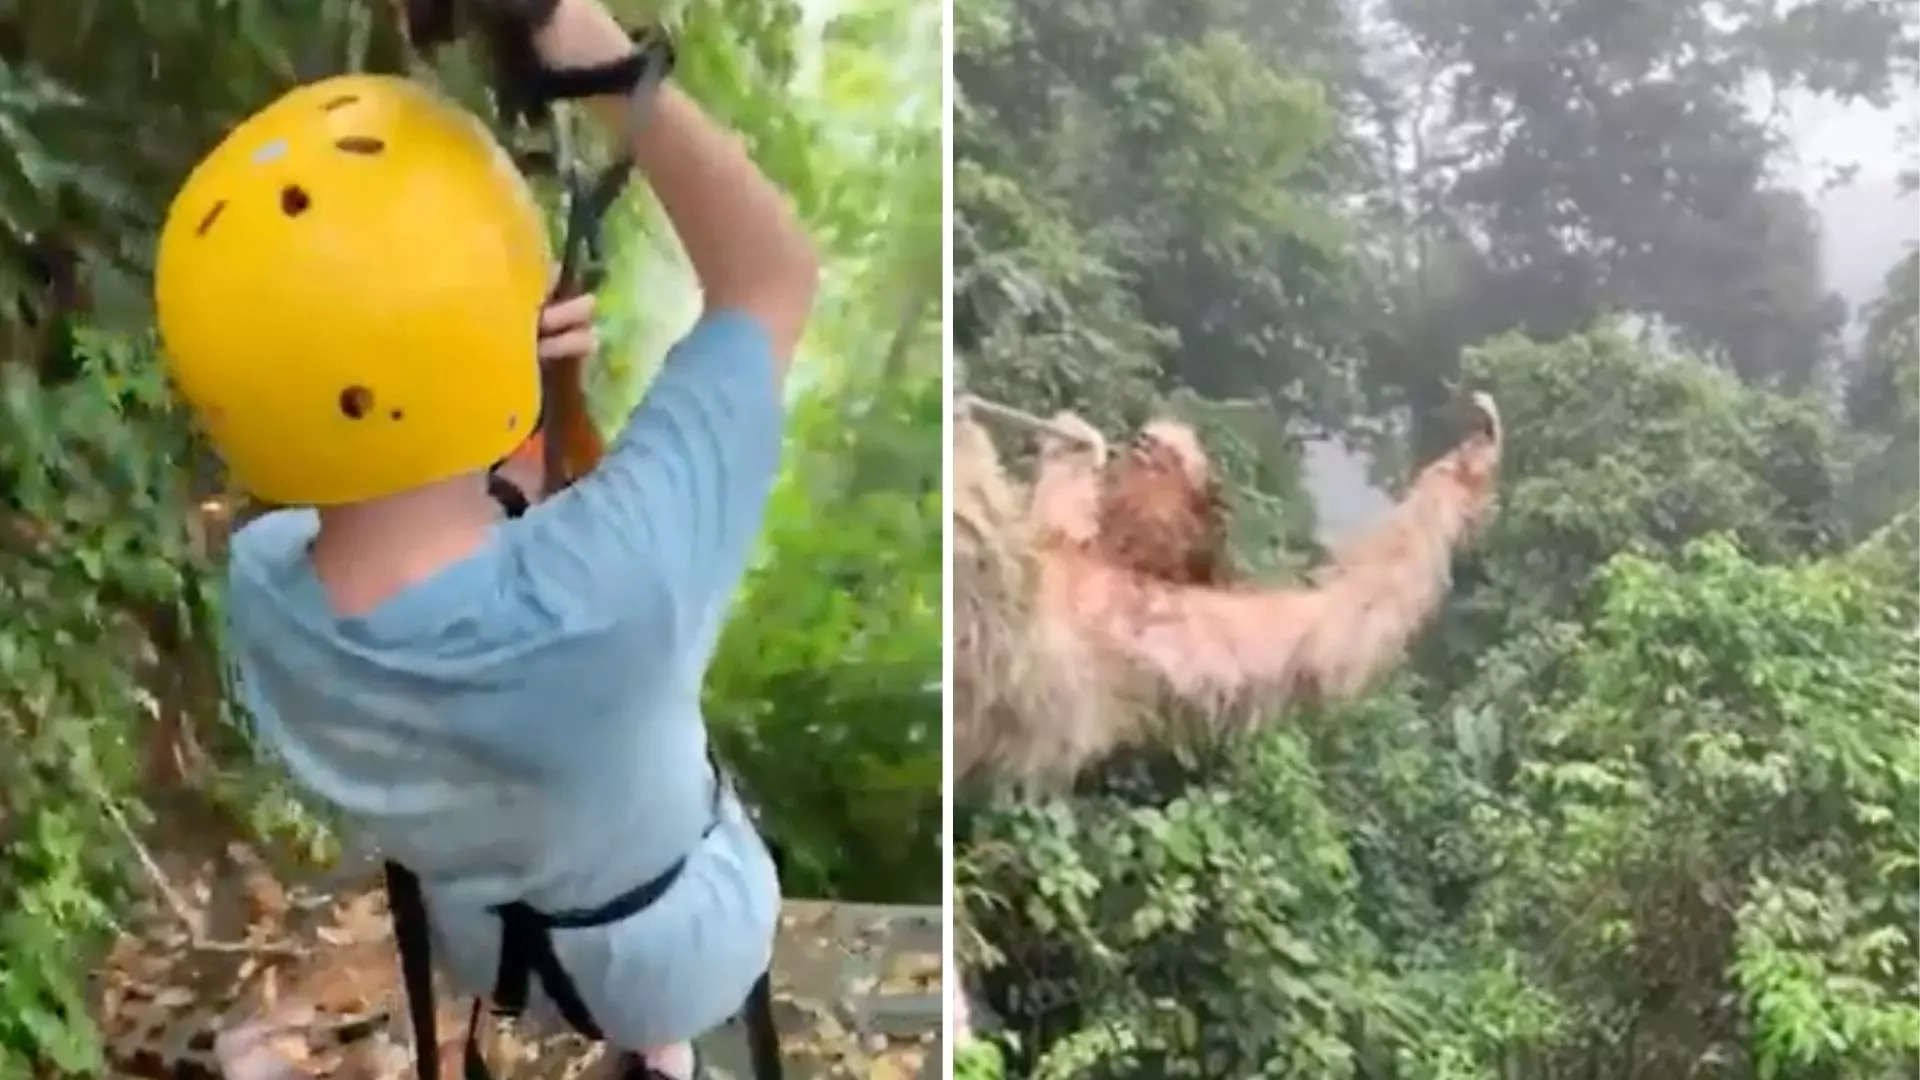 Zipliners in a Central American rainforest hit a sloth